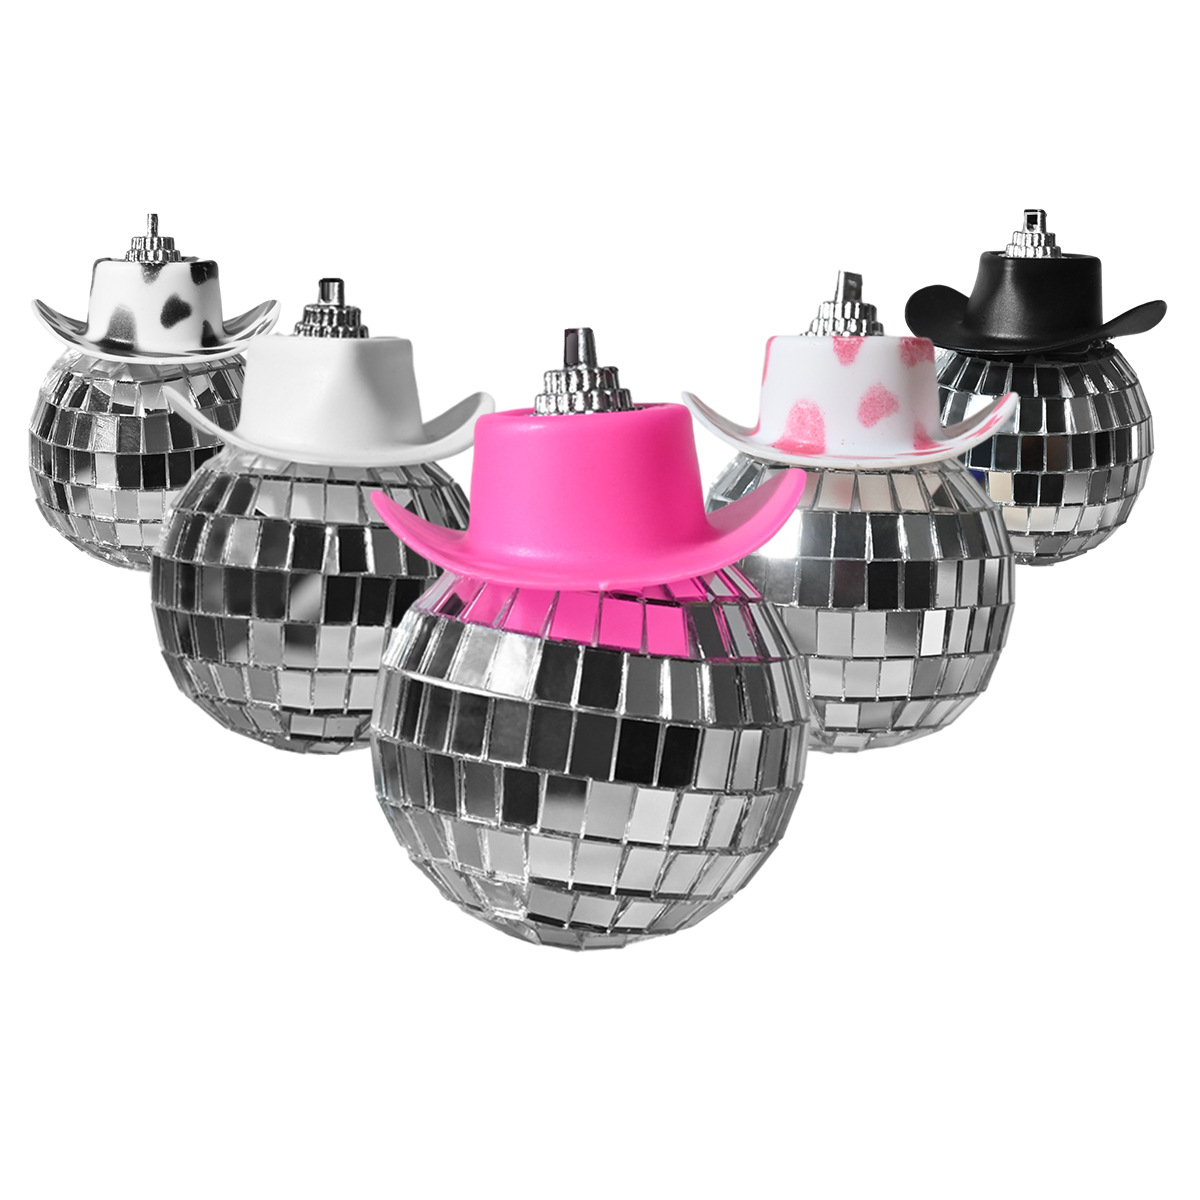 Christmas Cartoon Style Funny Hat Ball Glass Indoor Inside The Car Hanging Ornaments display picture 3